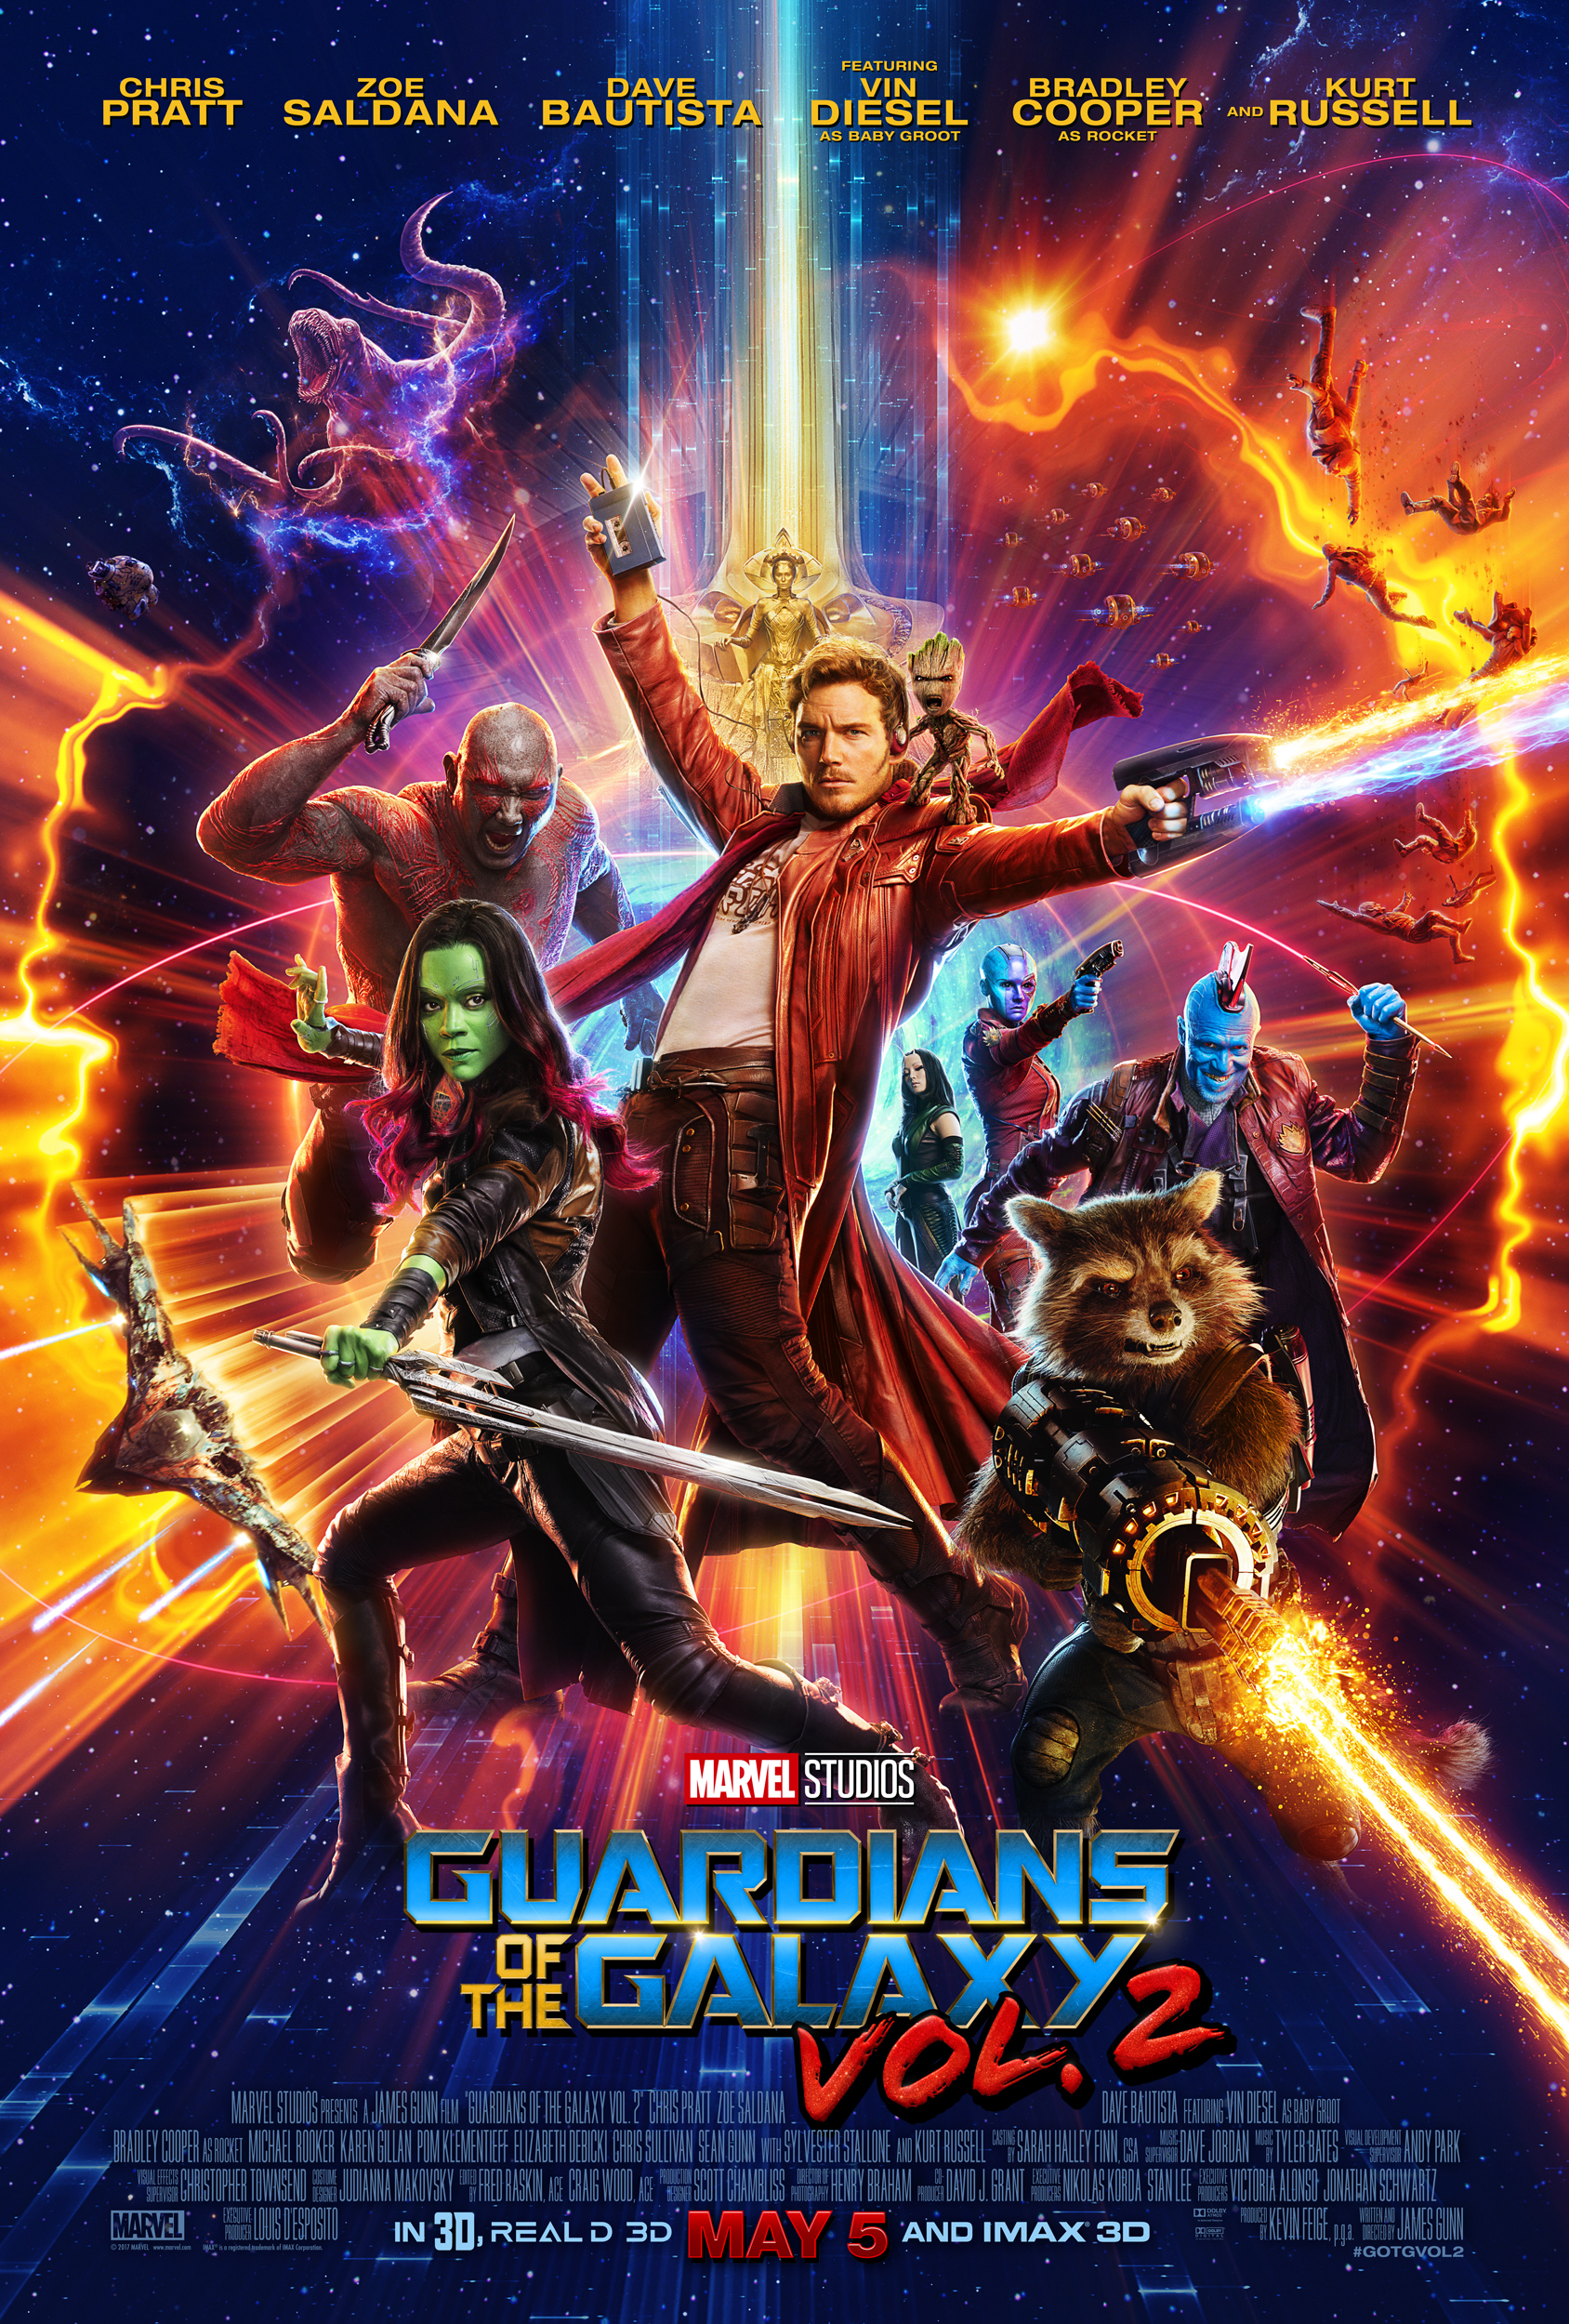 Guardians_of_the_Galaxy_Vol._2_(film)_poster_004